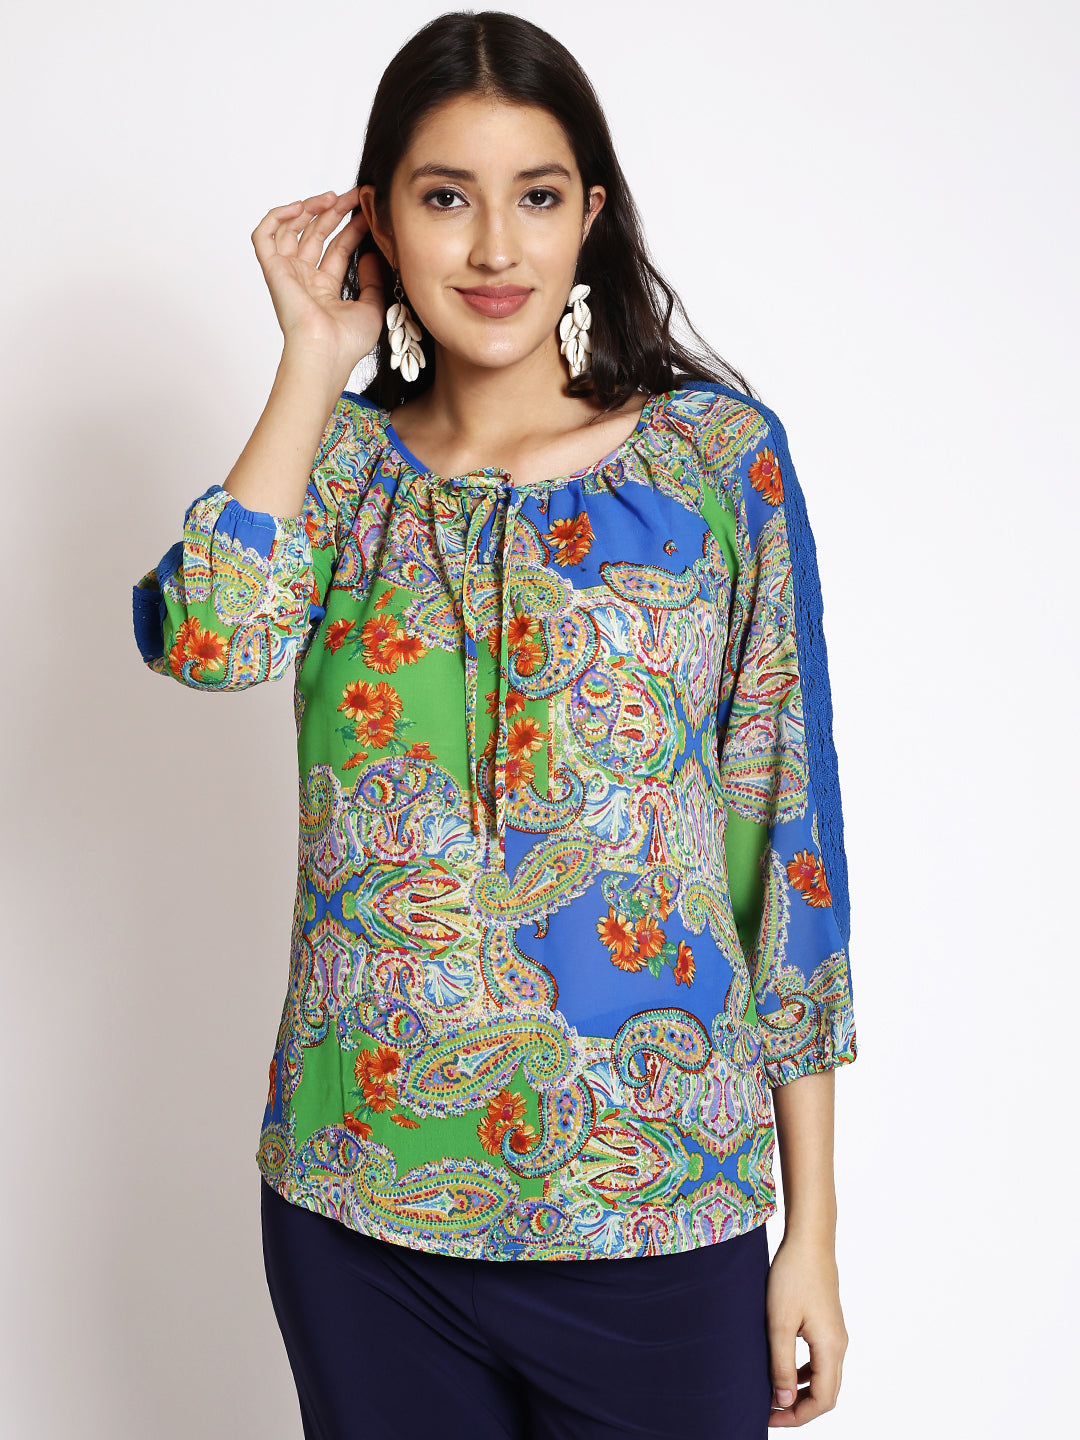 Ethnic Motifs Printed Tie-Up Neck Raglan Sleeves Lace Inserts Top